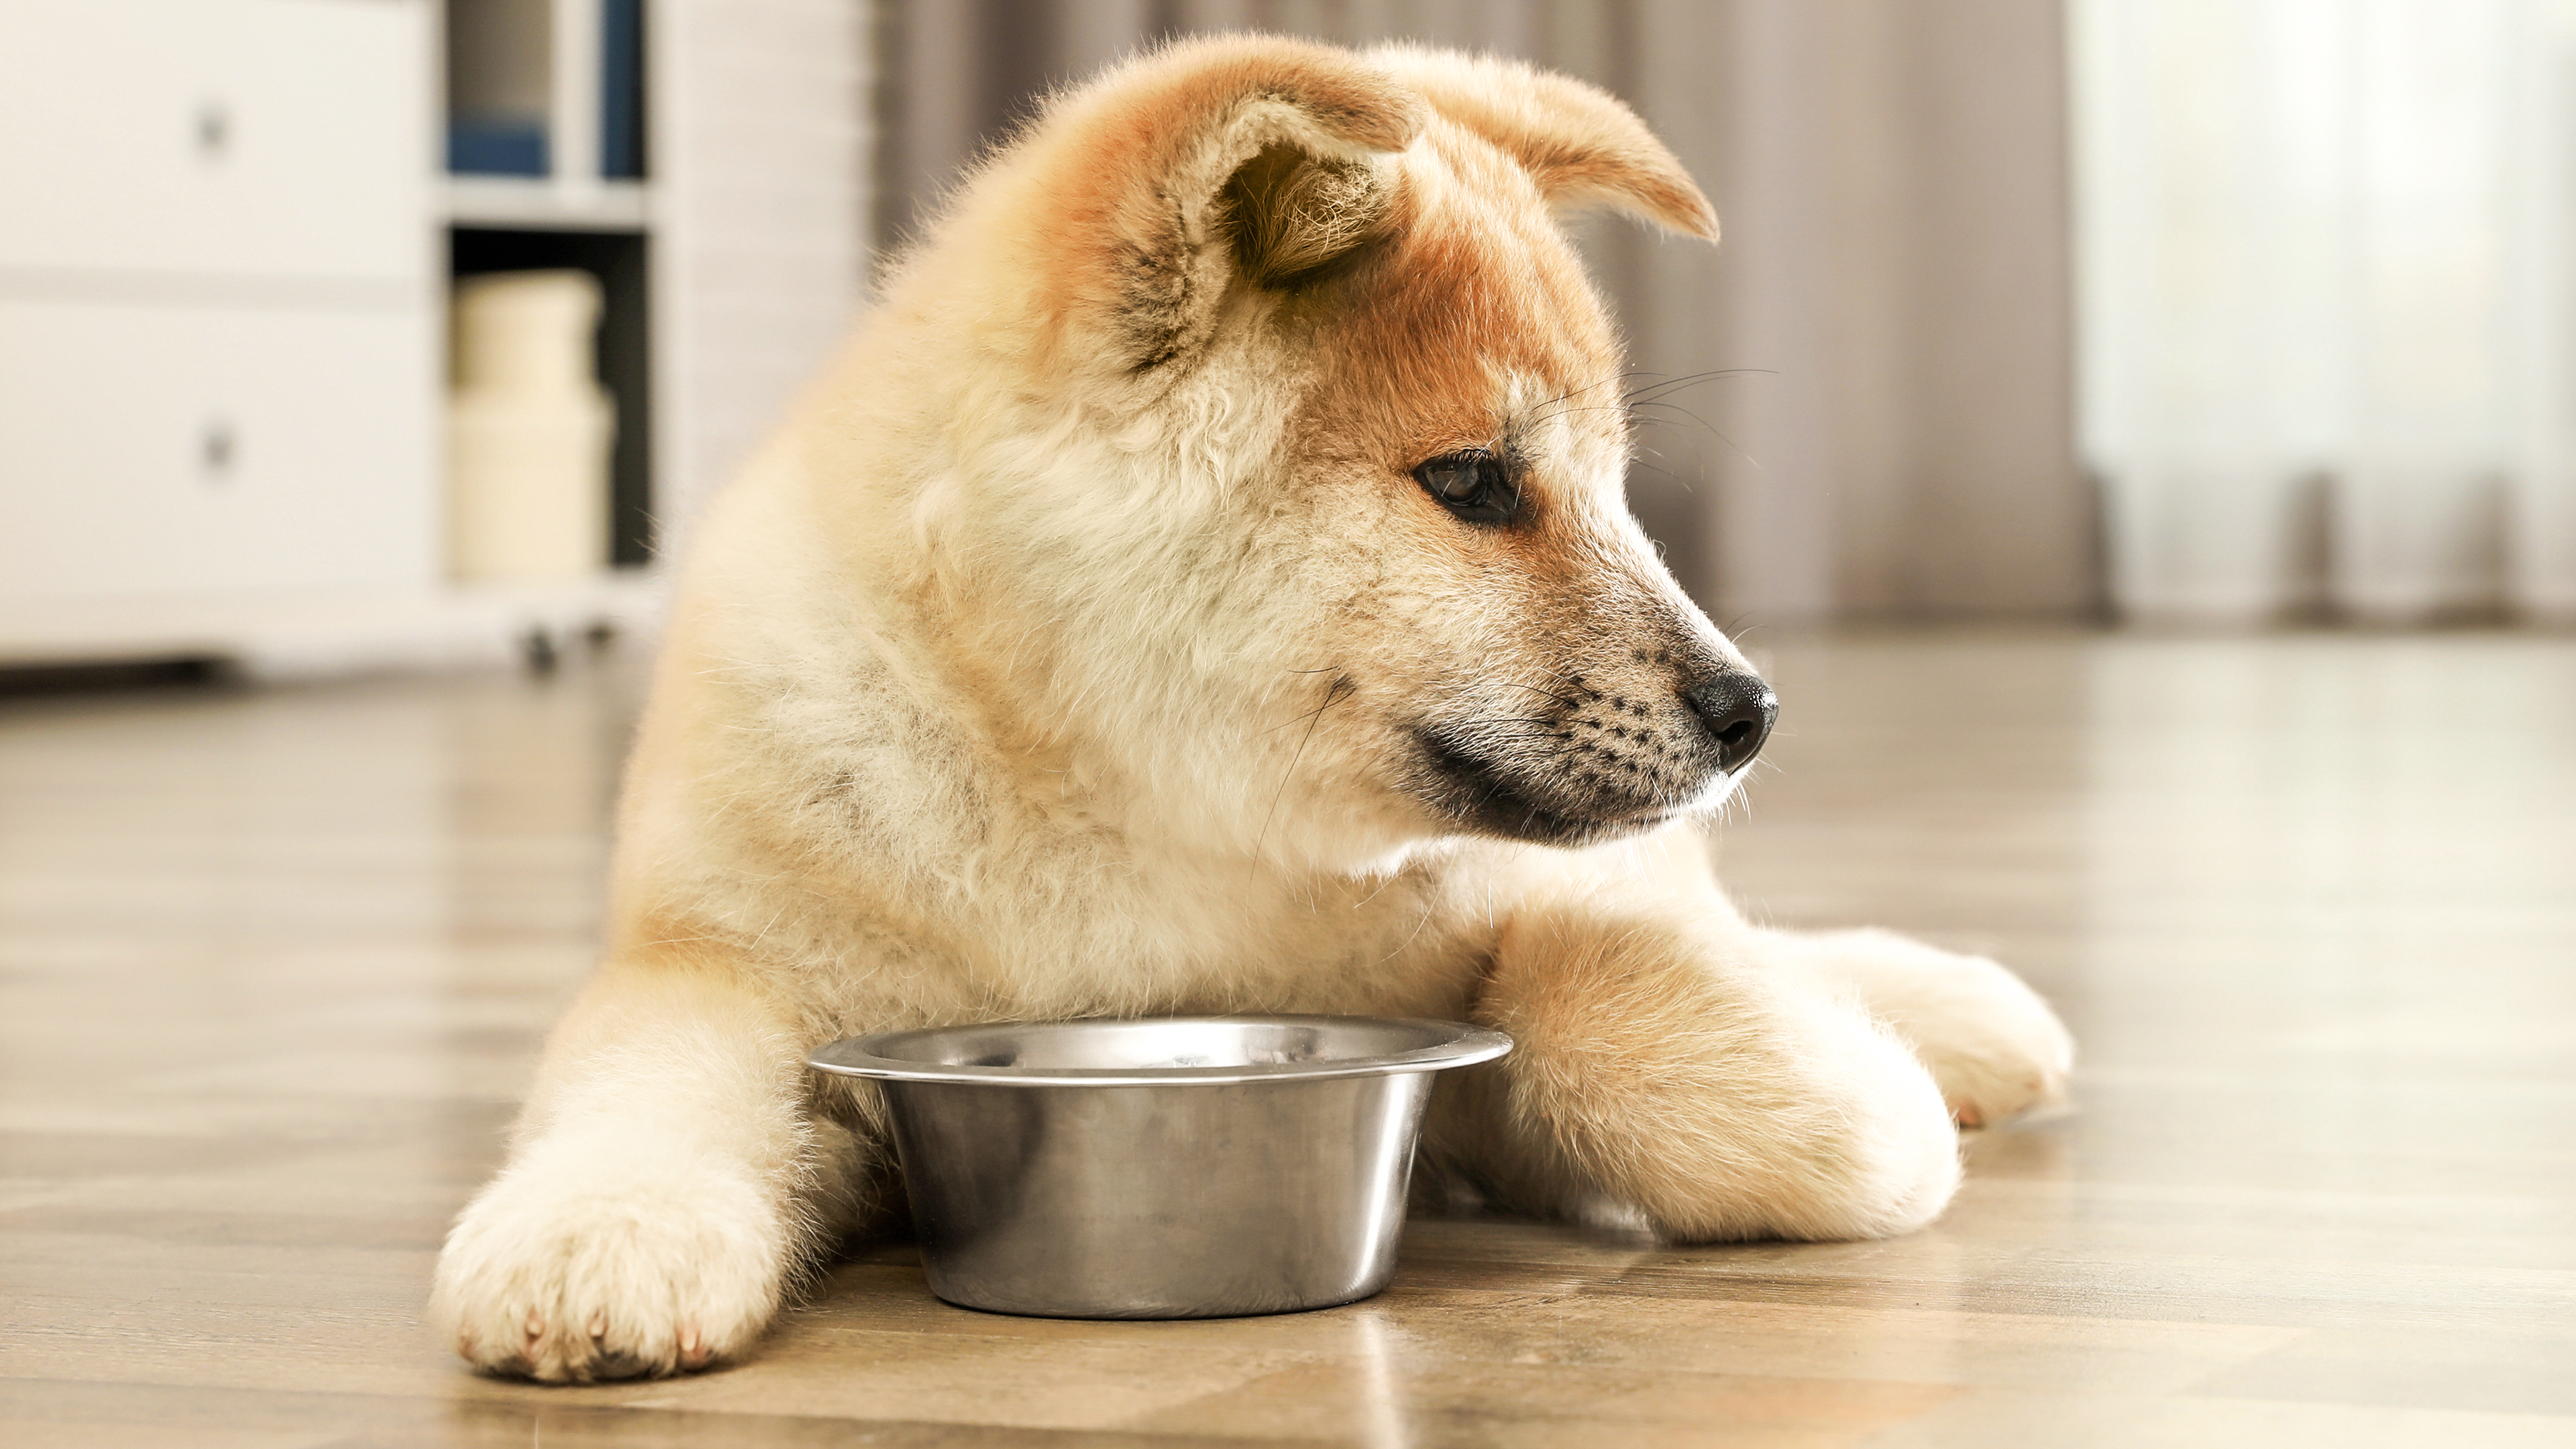 Akita puppy lying down next to a stainless steel feeding bowl